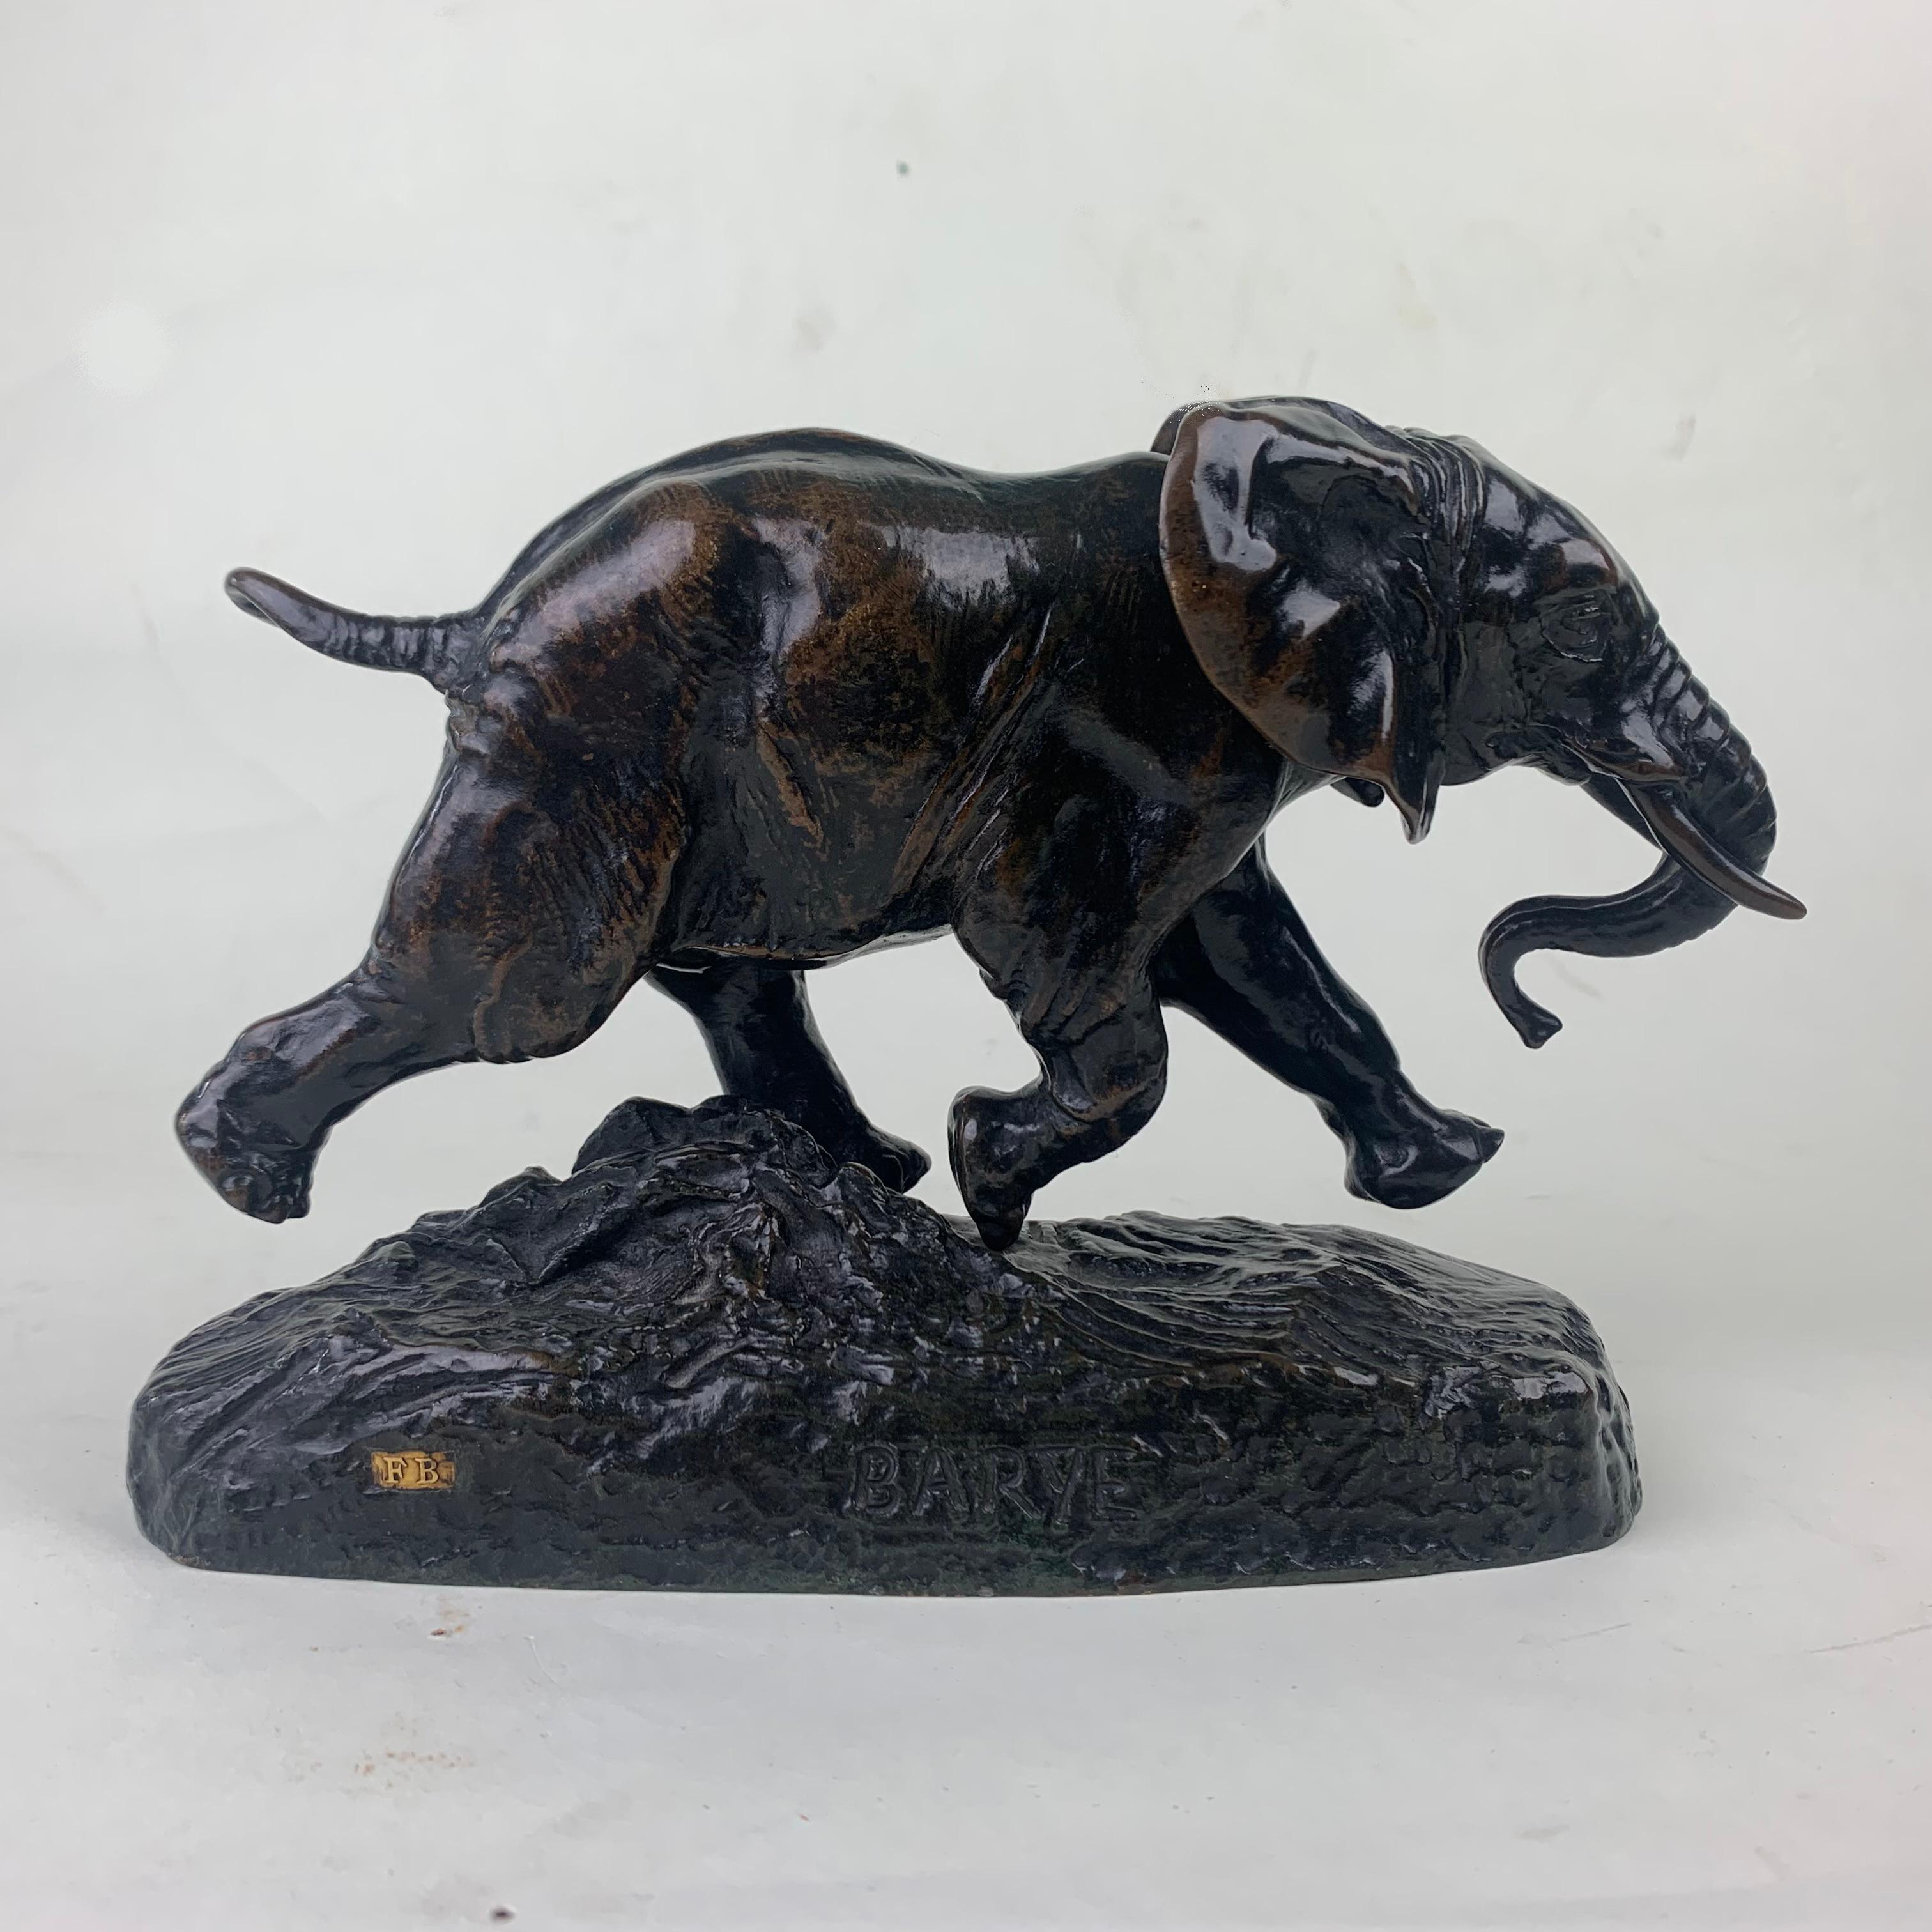 A superb late 19th century French bronze figure entitled 'Elephant du Senegal' by Louis Barye - the bronze figureof a running elephant with excellent deep brown, lightly rubbed patination and extremely fine hand chased surface de3tail on a